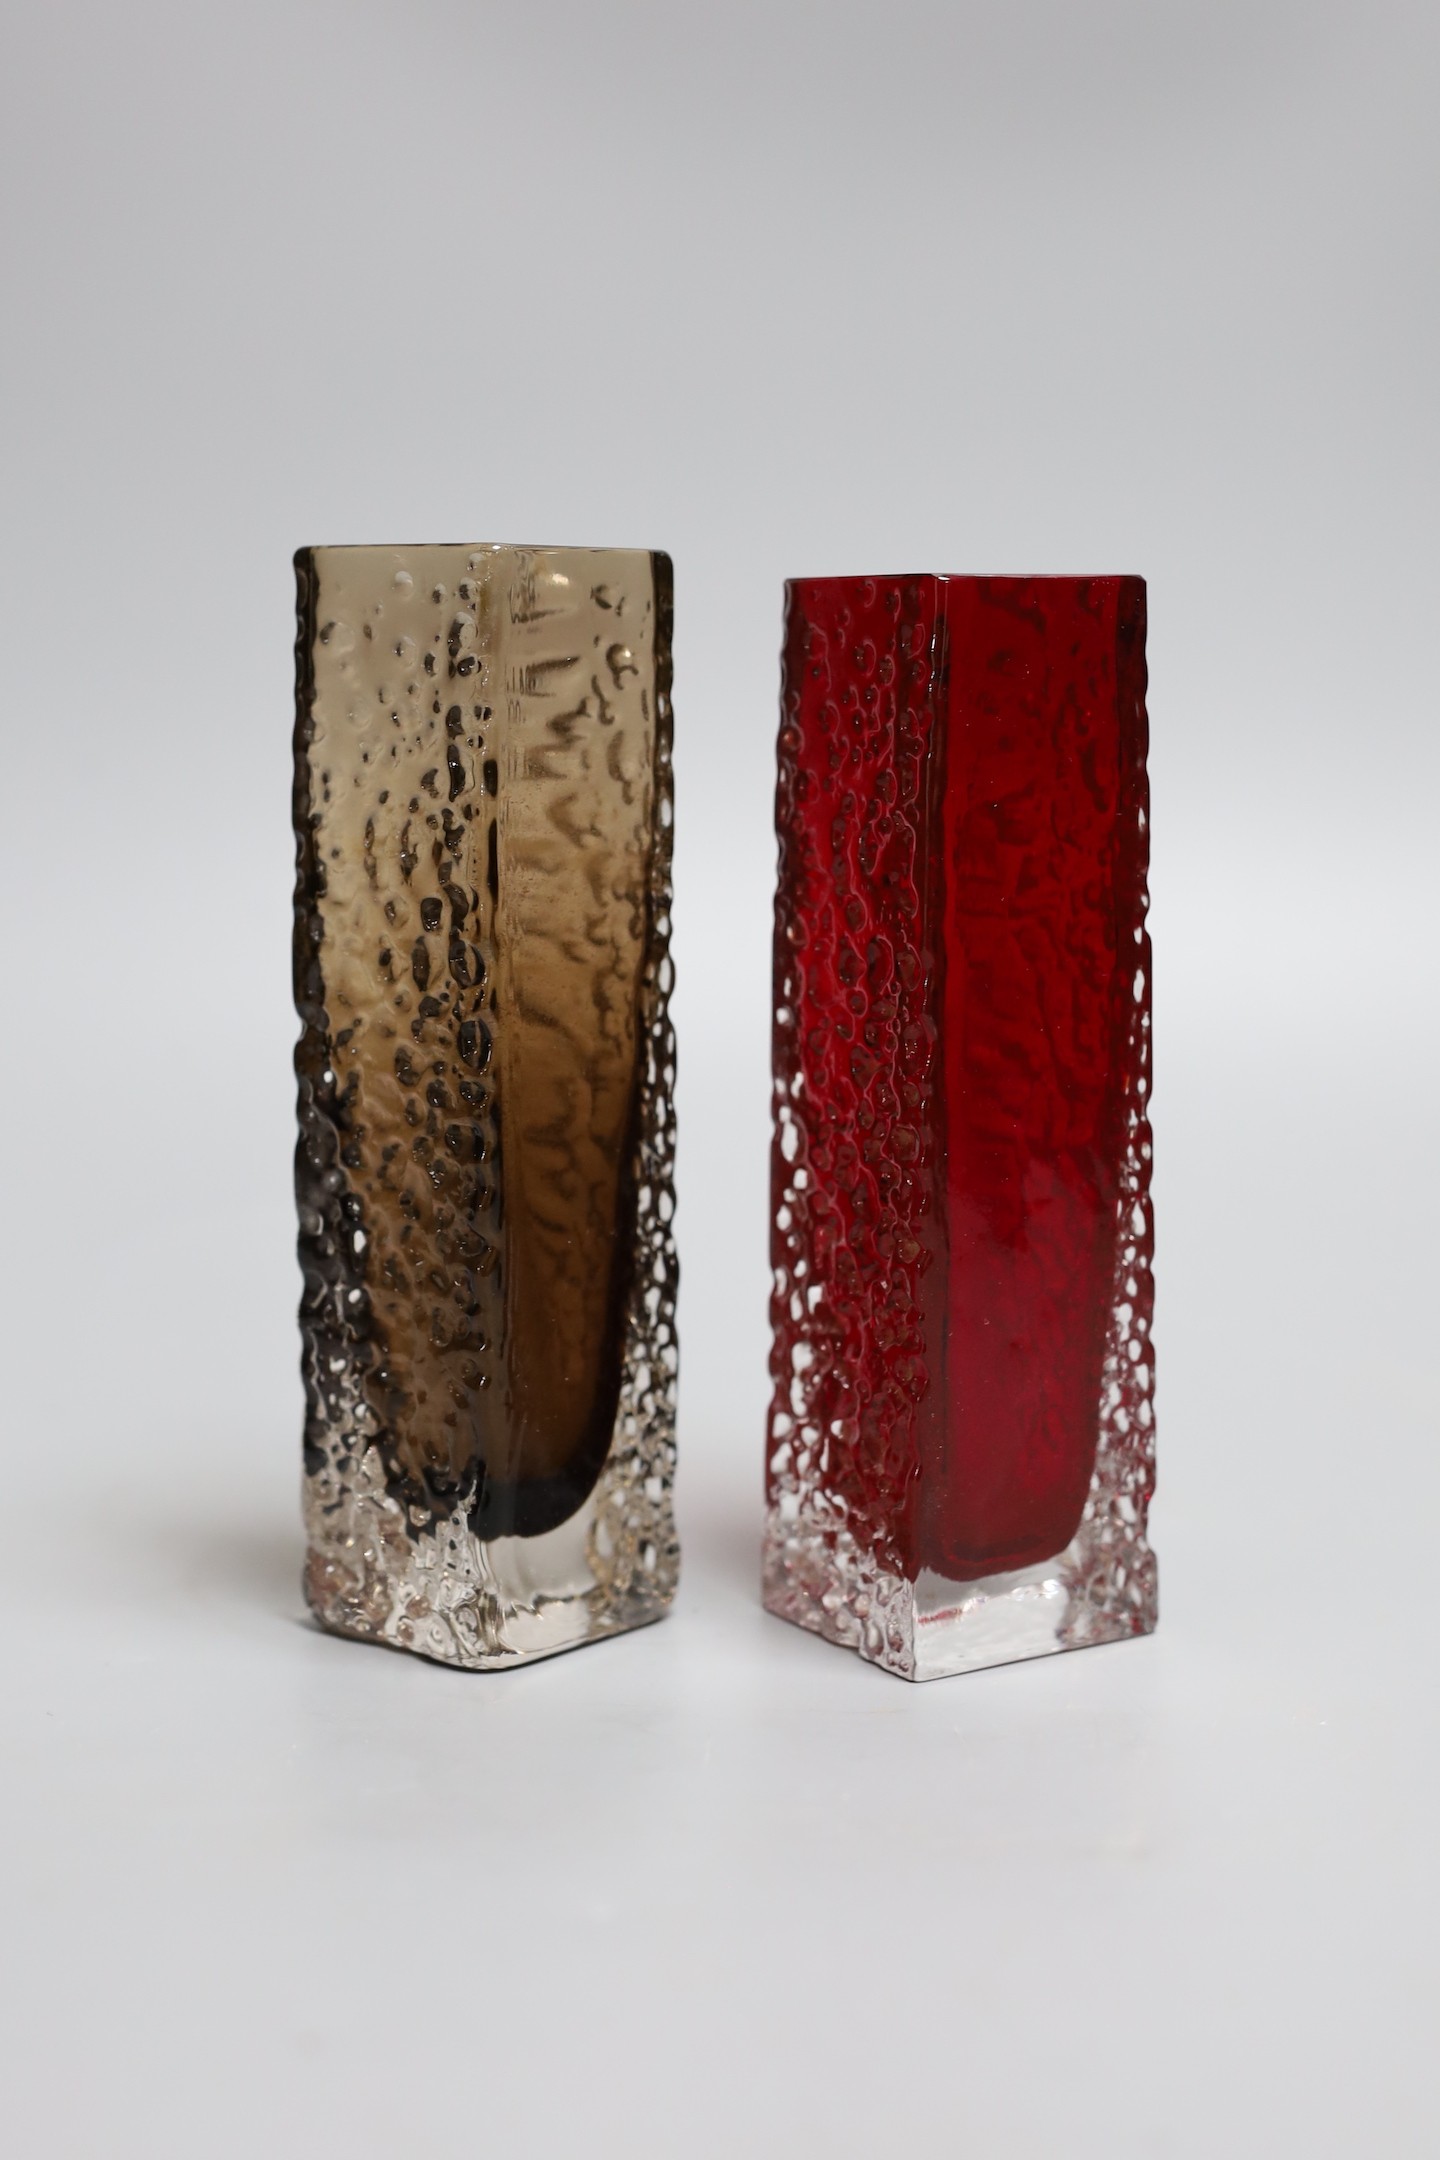 Two Whitefriars red 'Nailhead' vases, model 9683, designed by Geoffrey Baxter, each 17cm high.